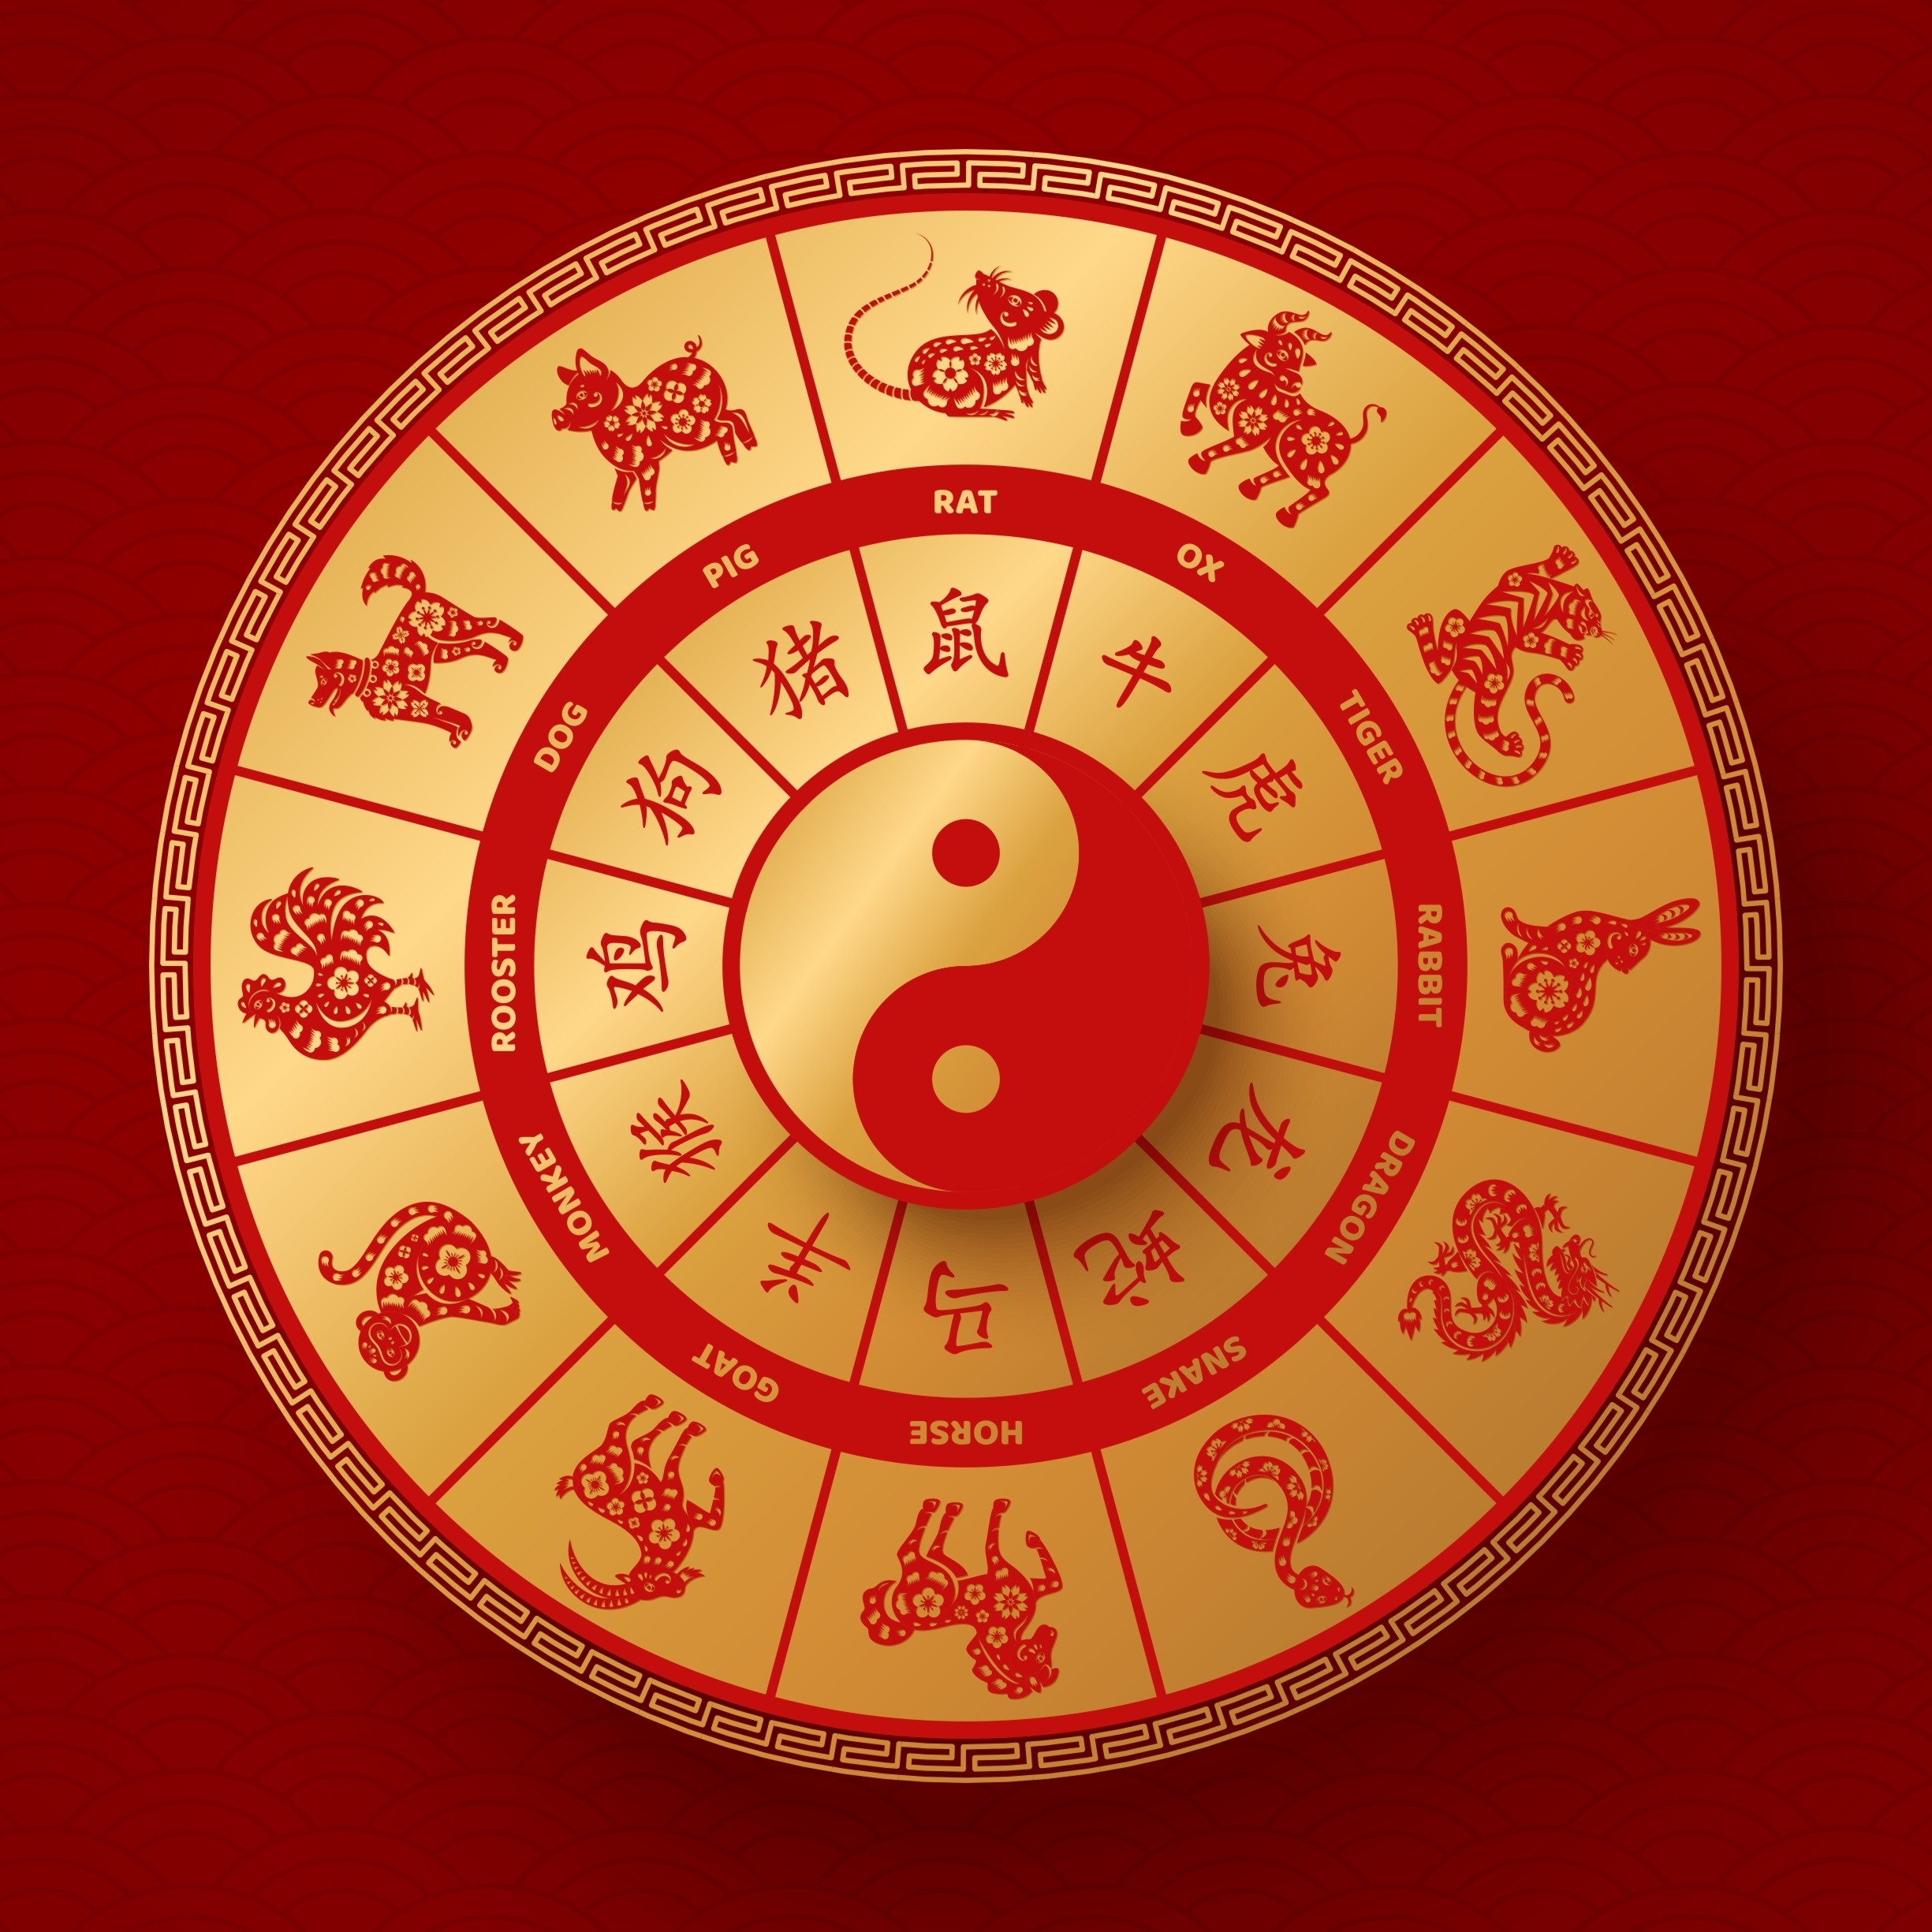 The 12 chinese zodiac signs